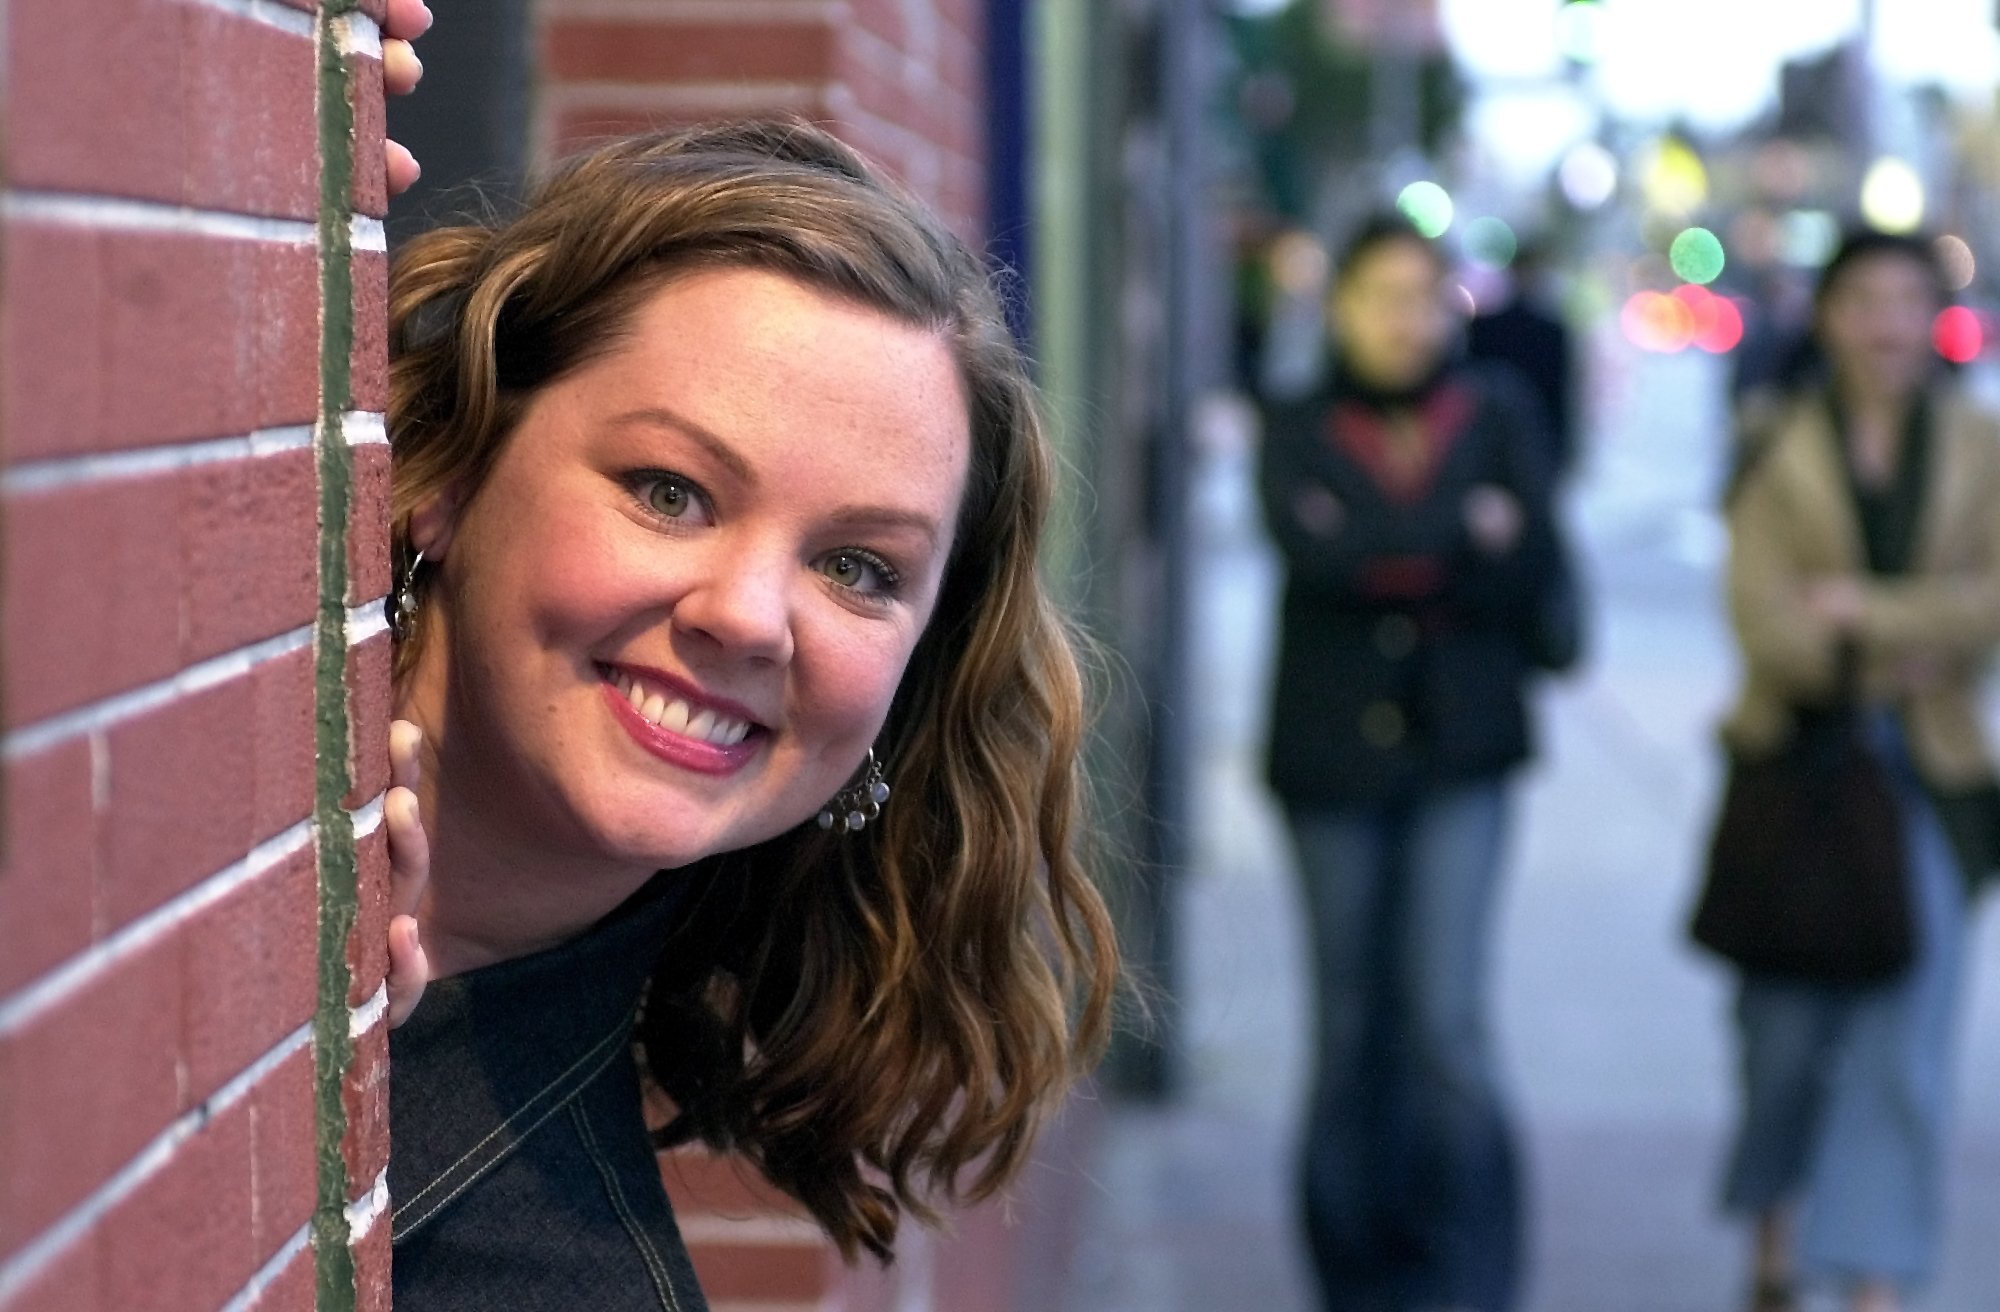 Sookie St. James actor Melissa McCarthy in promotional material for the Groundlings peeking out from behind a brick wall